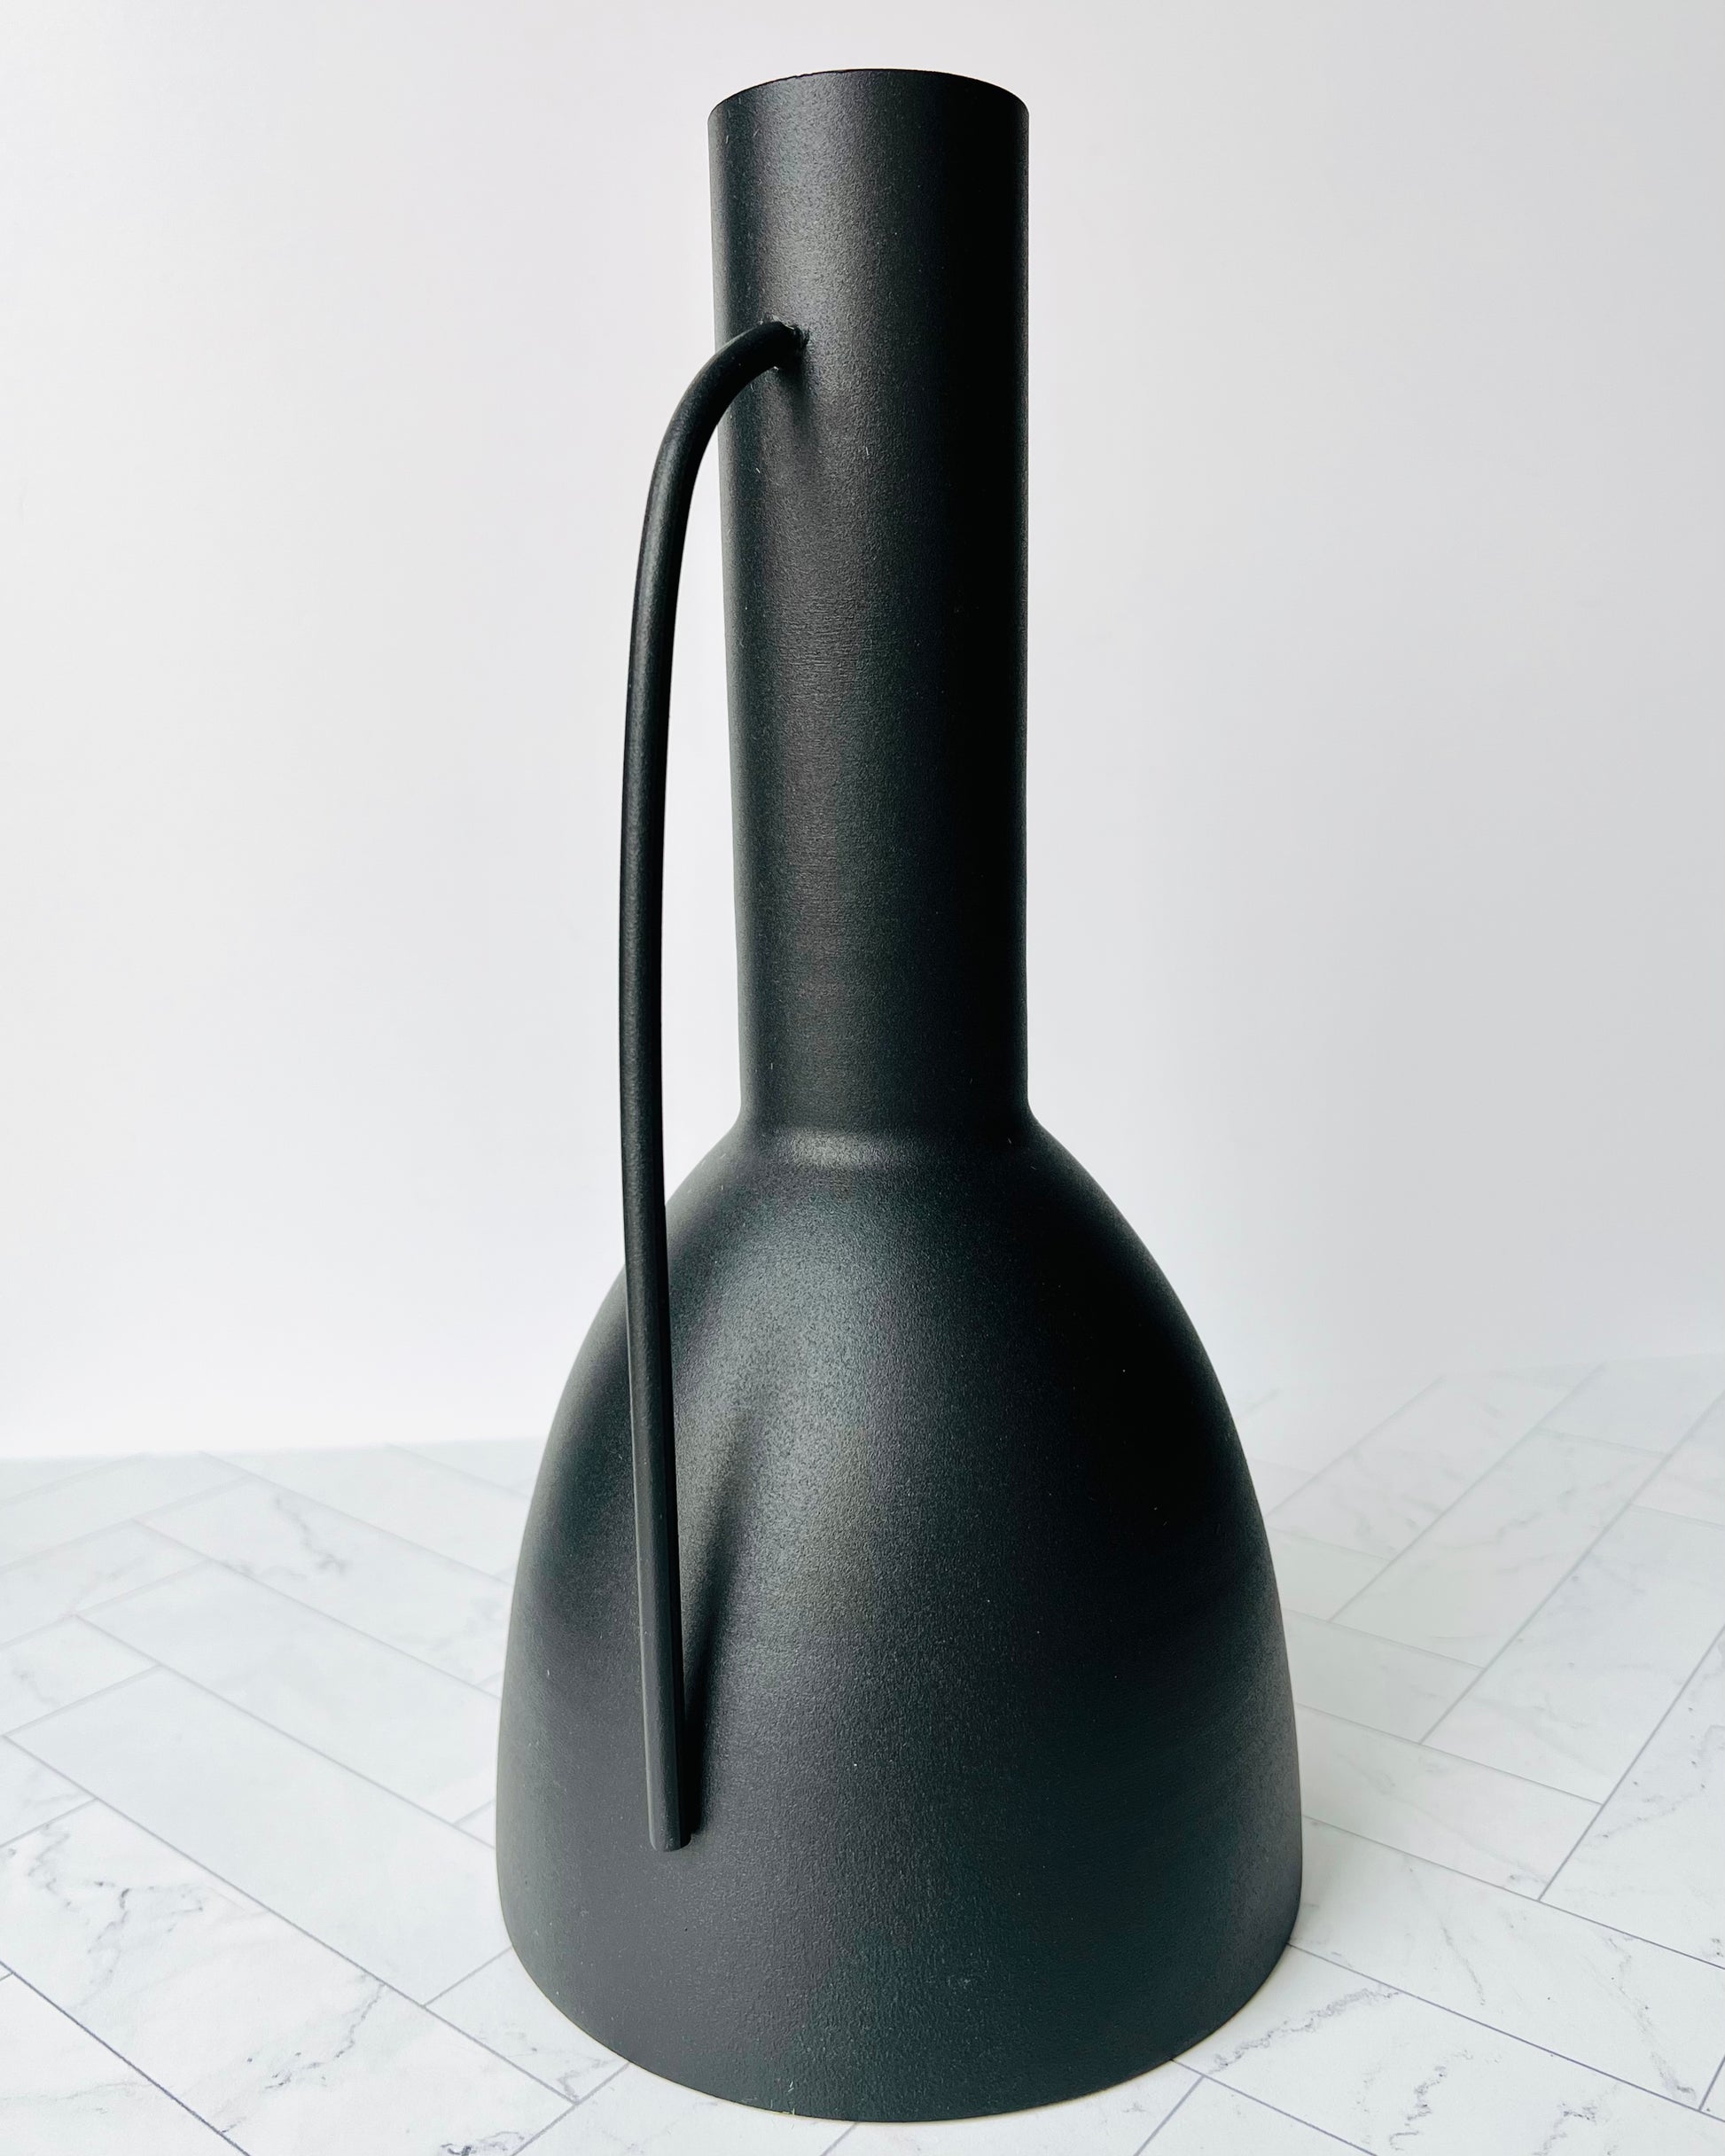 The Sleek Black Vase with its handle facing toward the camera to show it off